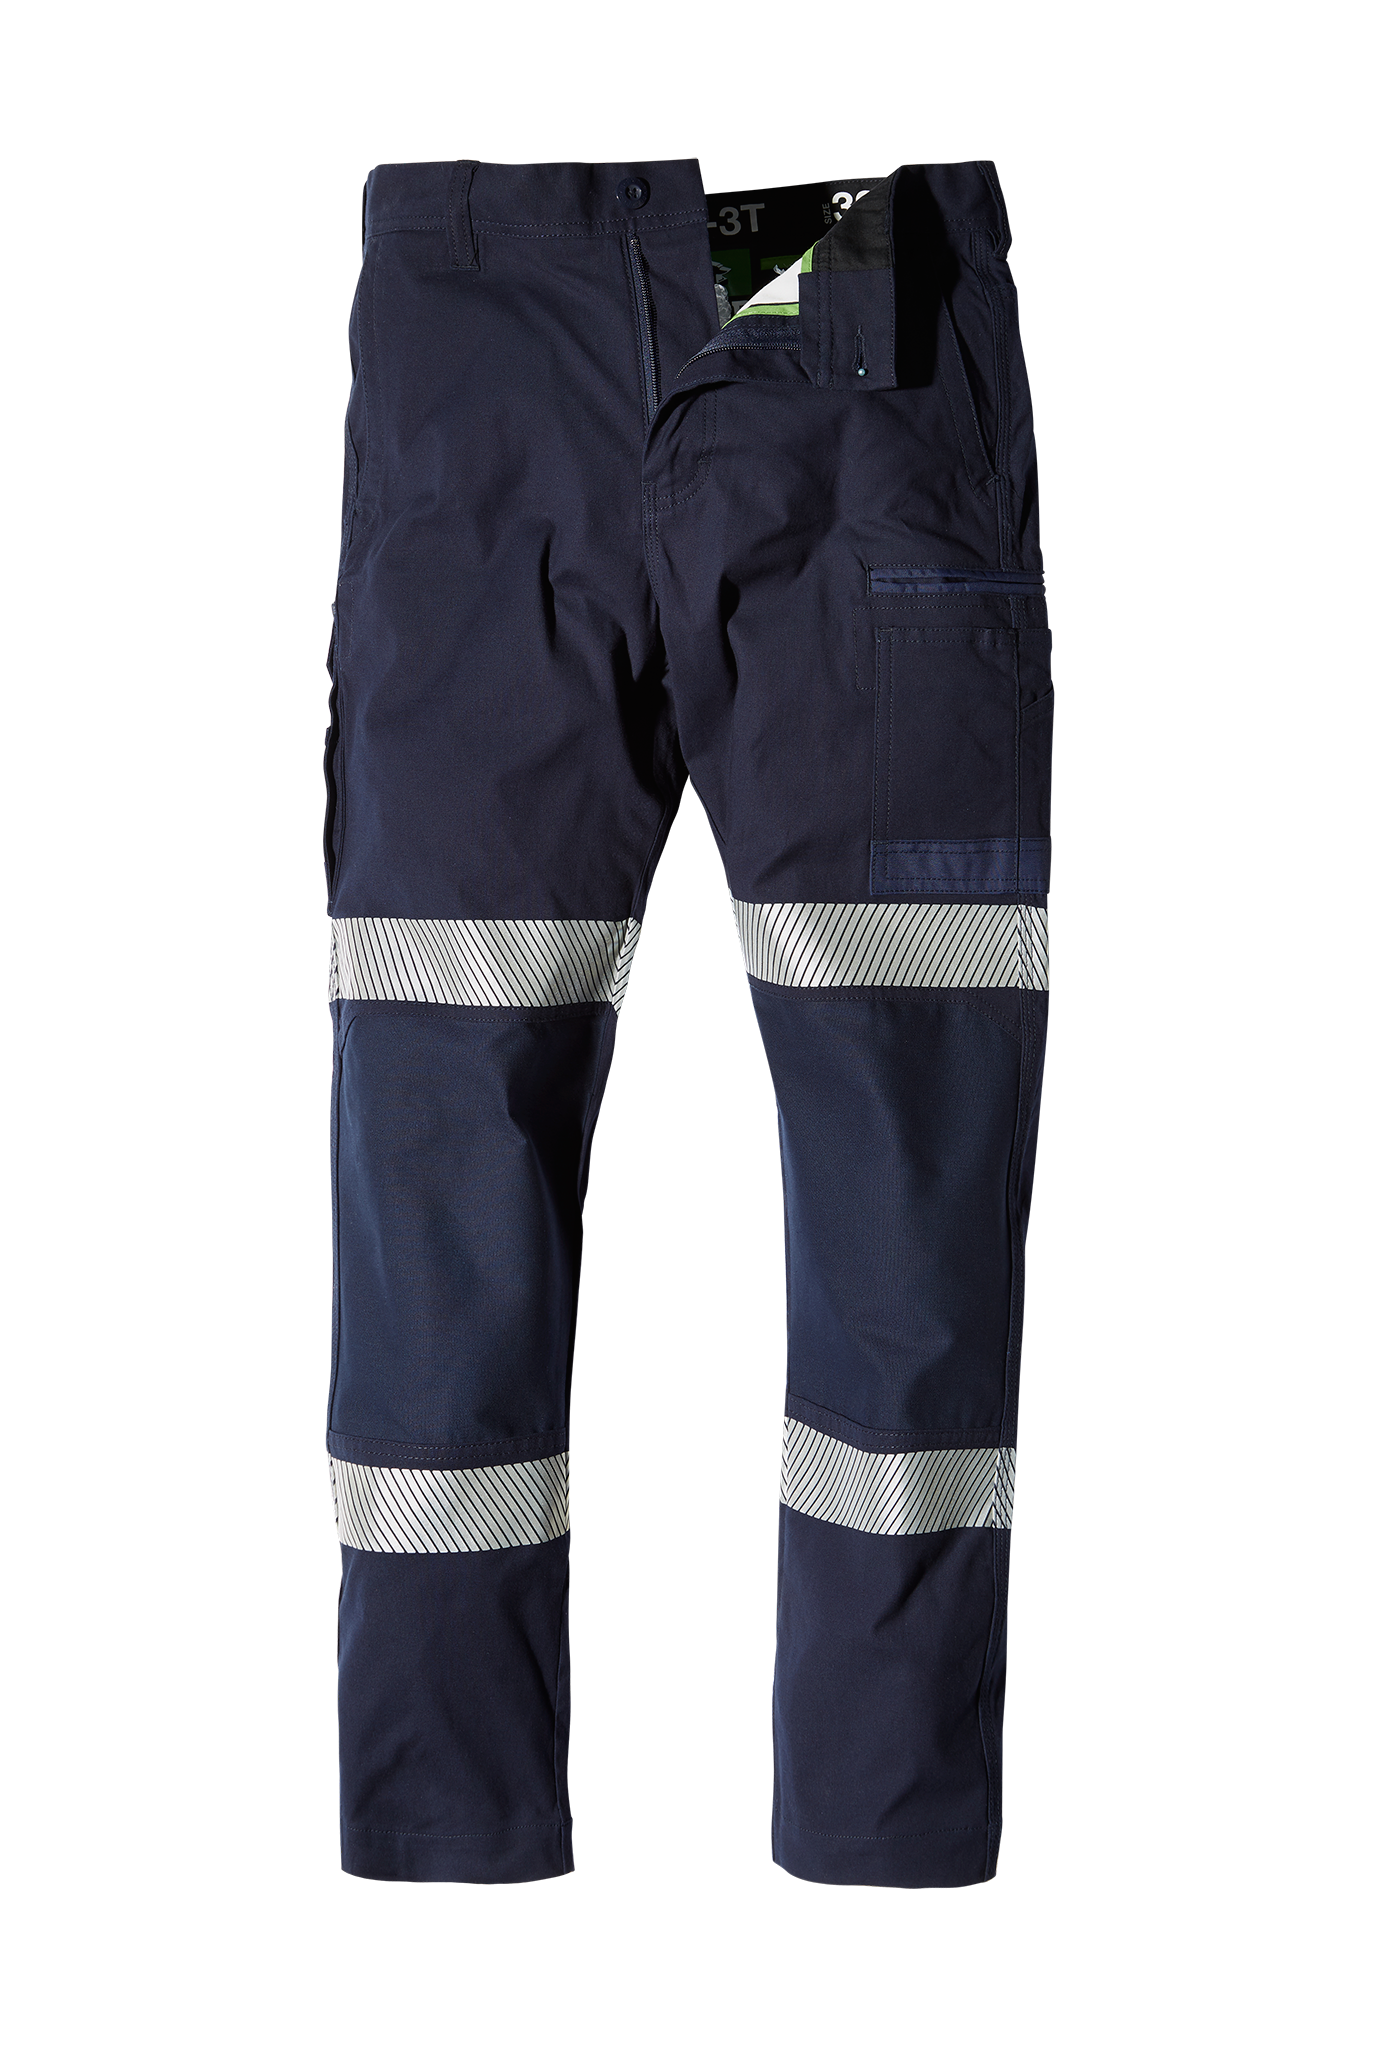 Workwear - FXD Reflective Work Pant 360 Degree Stretch